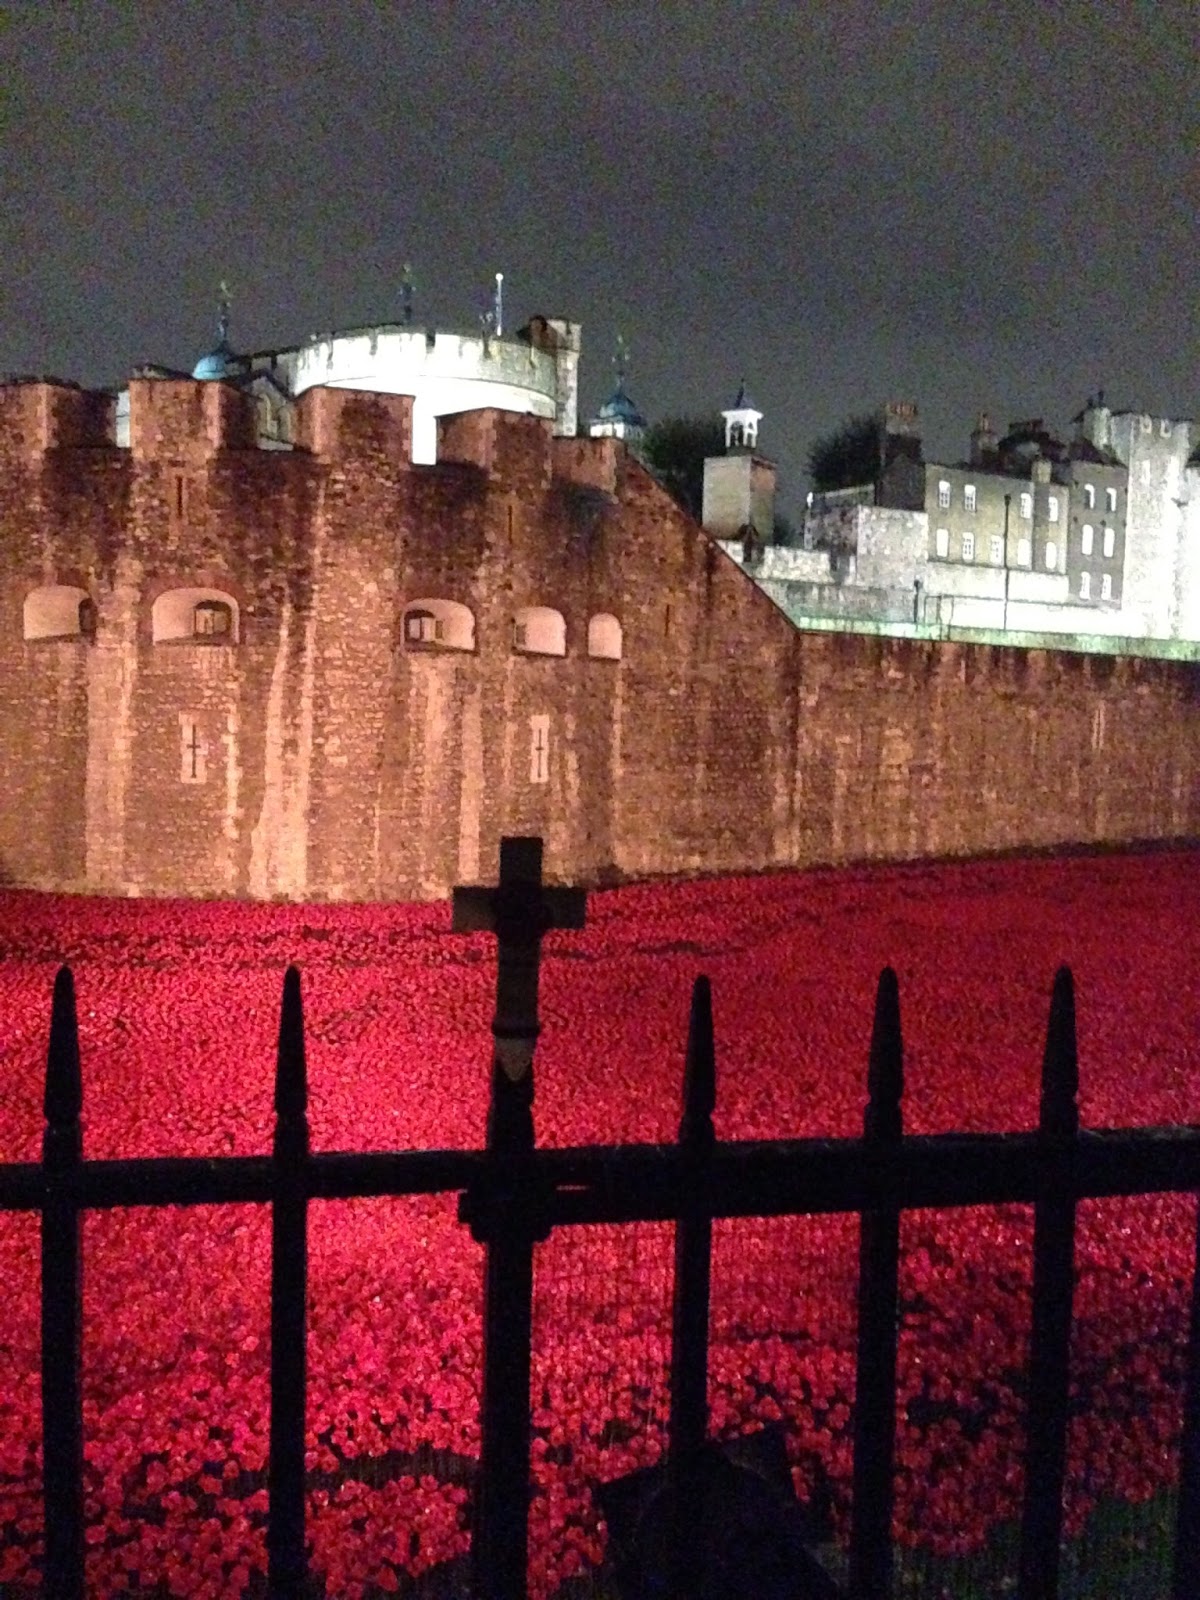 The last poppy will be planted tomorrow at 11am at the Tower of London - 11 November 2014